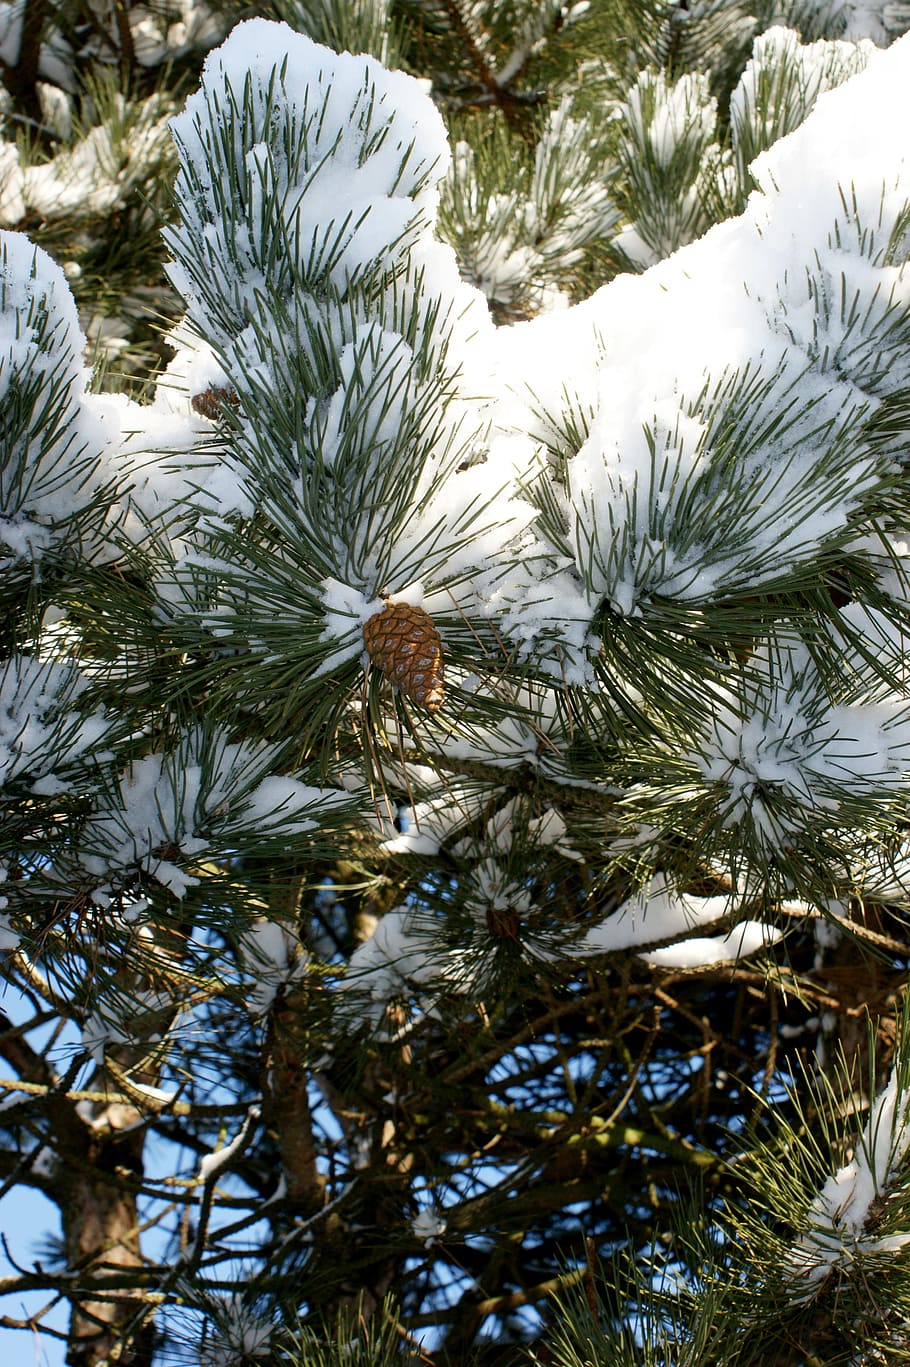 Snow, Winter, Cold, Pine, Conifer, pine branch, tannenzweig, tap, pine bough, nature